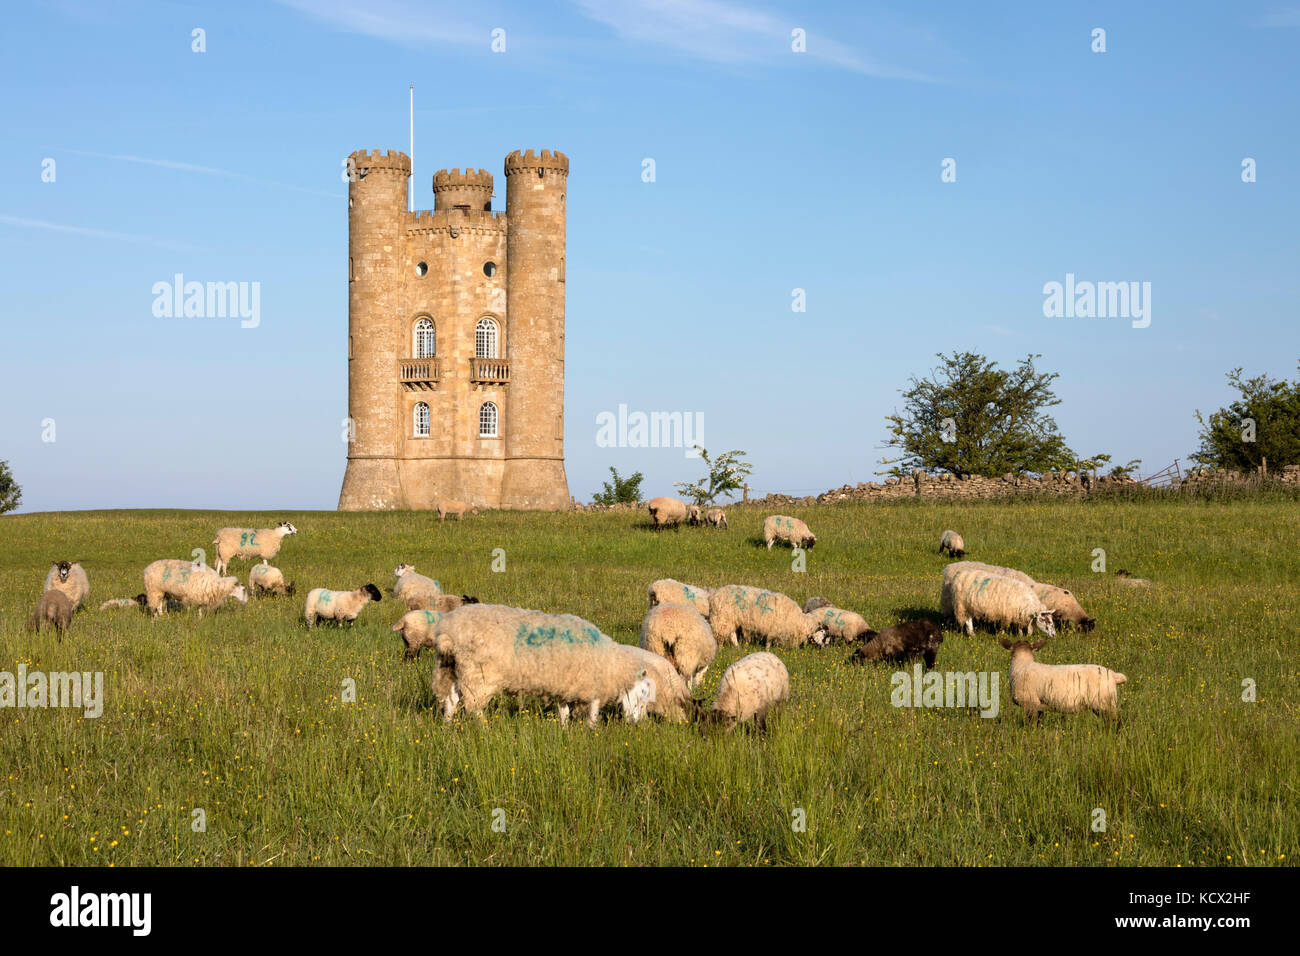 Broadway Tower with grazing sheep in grass field, Broadway, Cotswolds, Worcestershire, England, United Kingdom, Europe Stock Photo